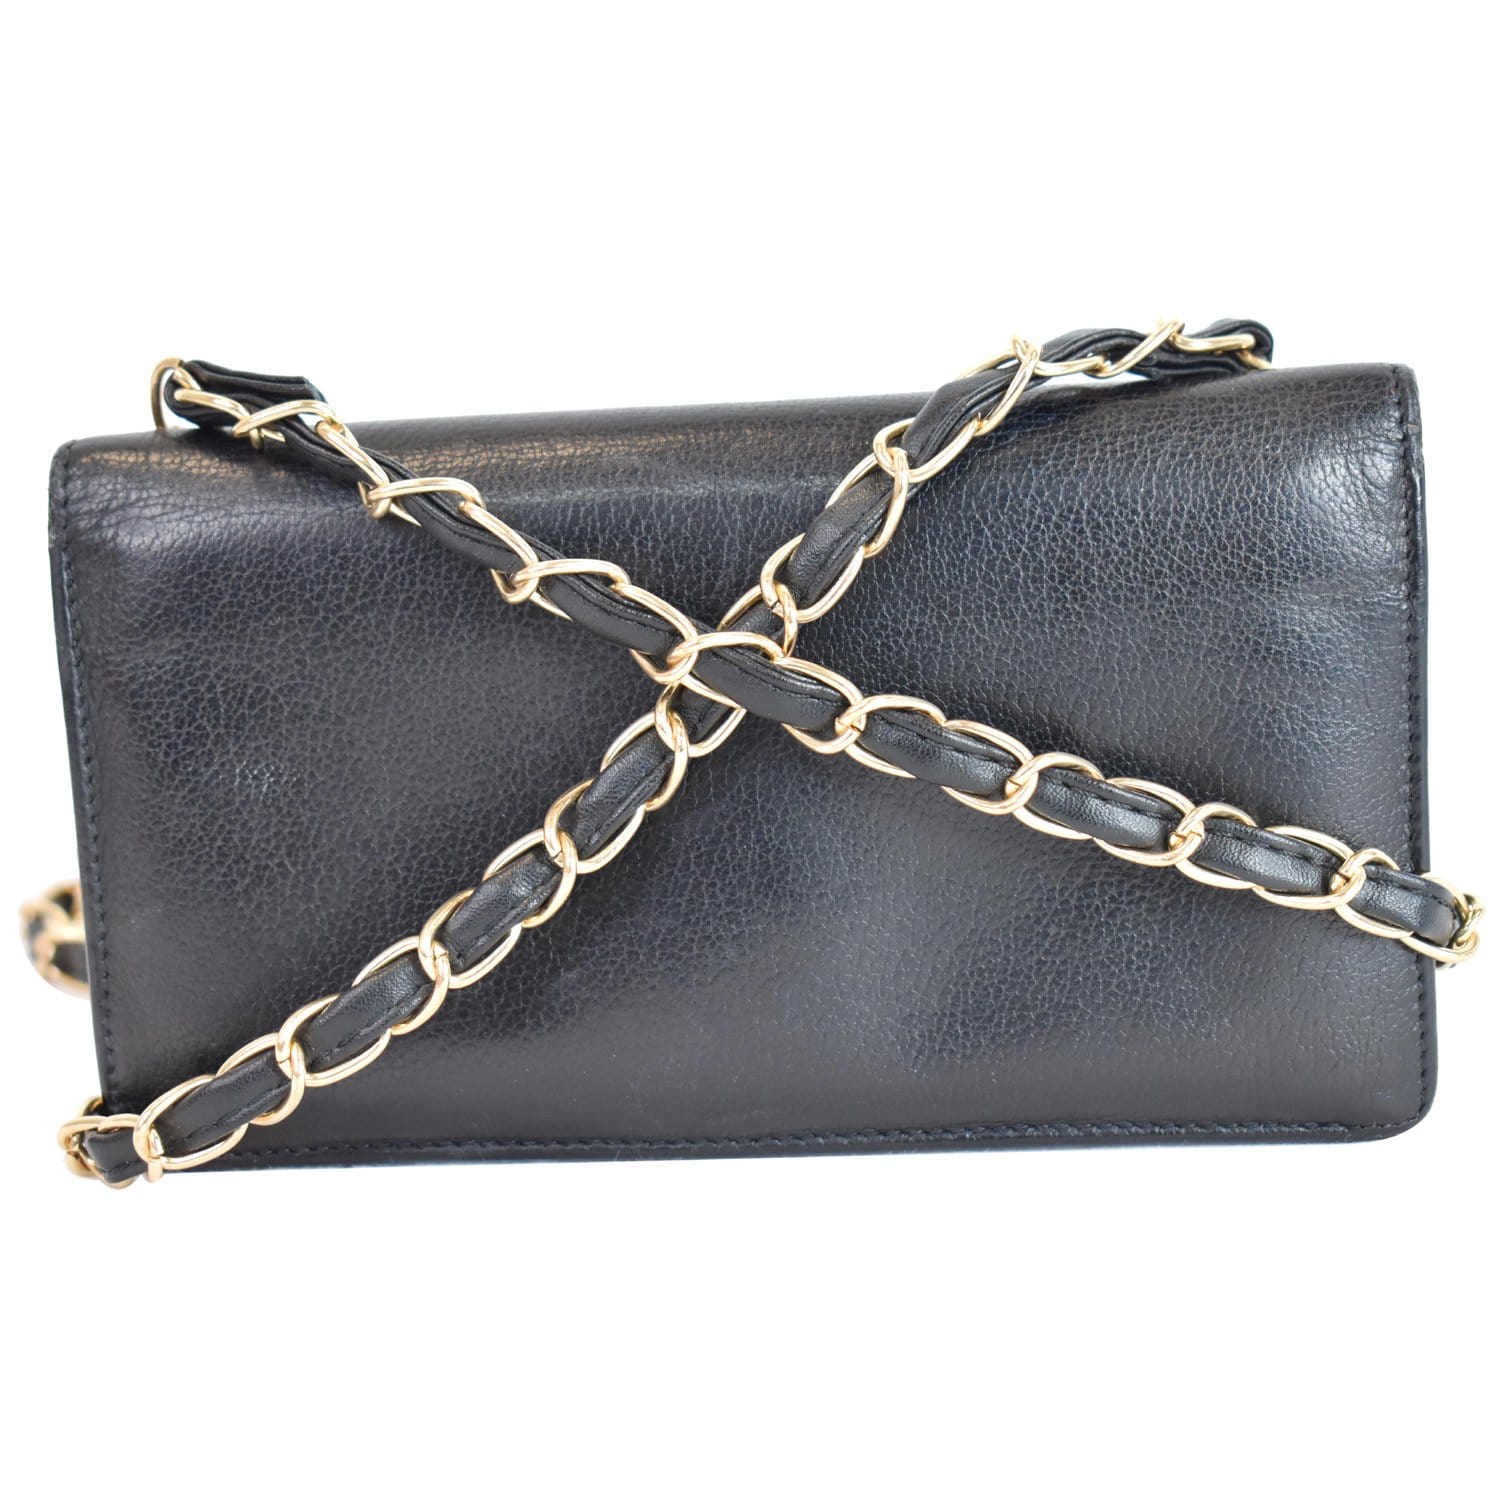 Chanel Red Patent Leather Camellia WOC Wallet On Chain Bag